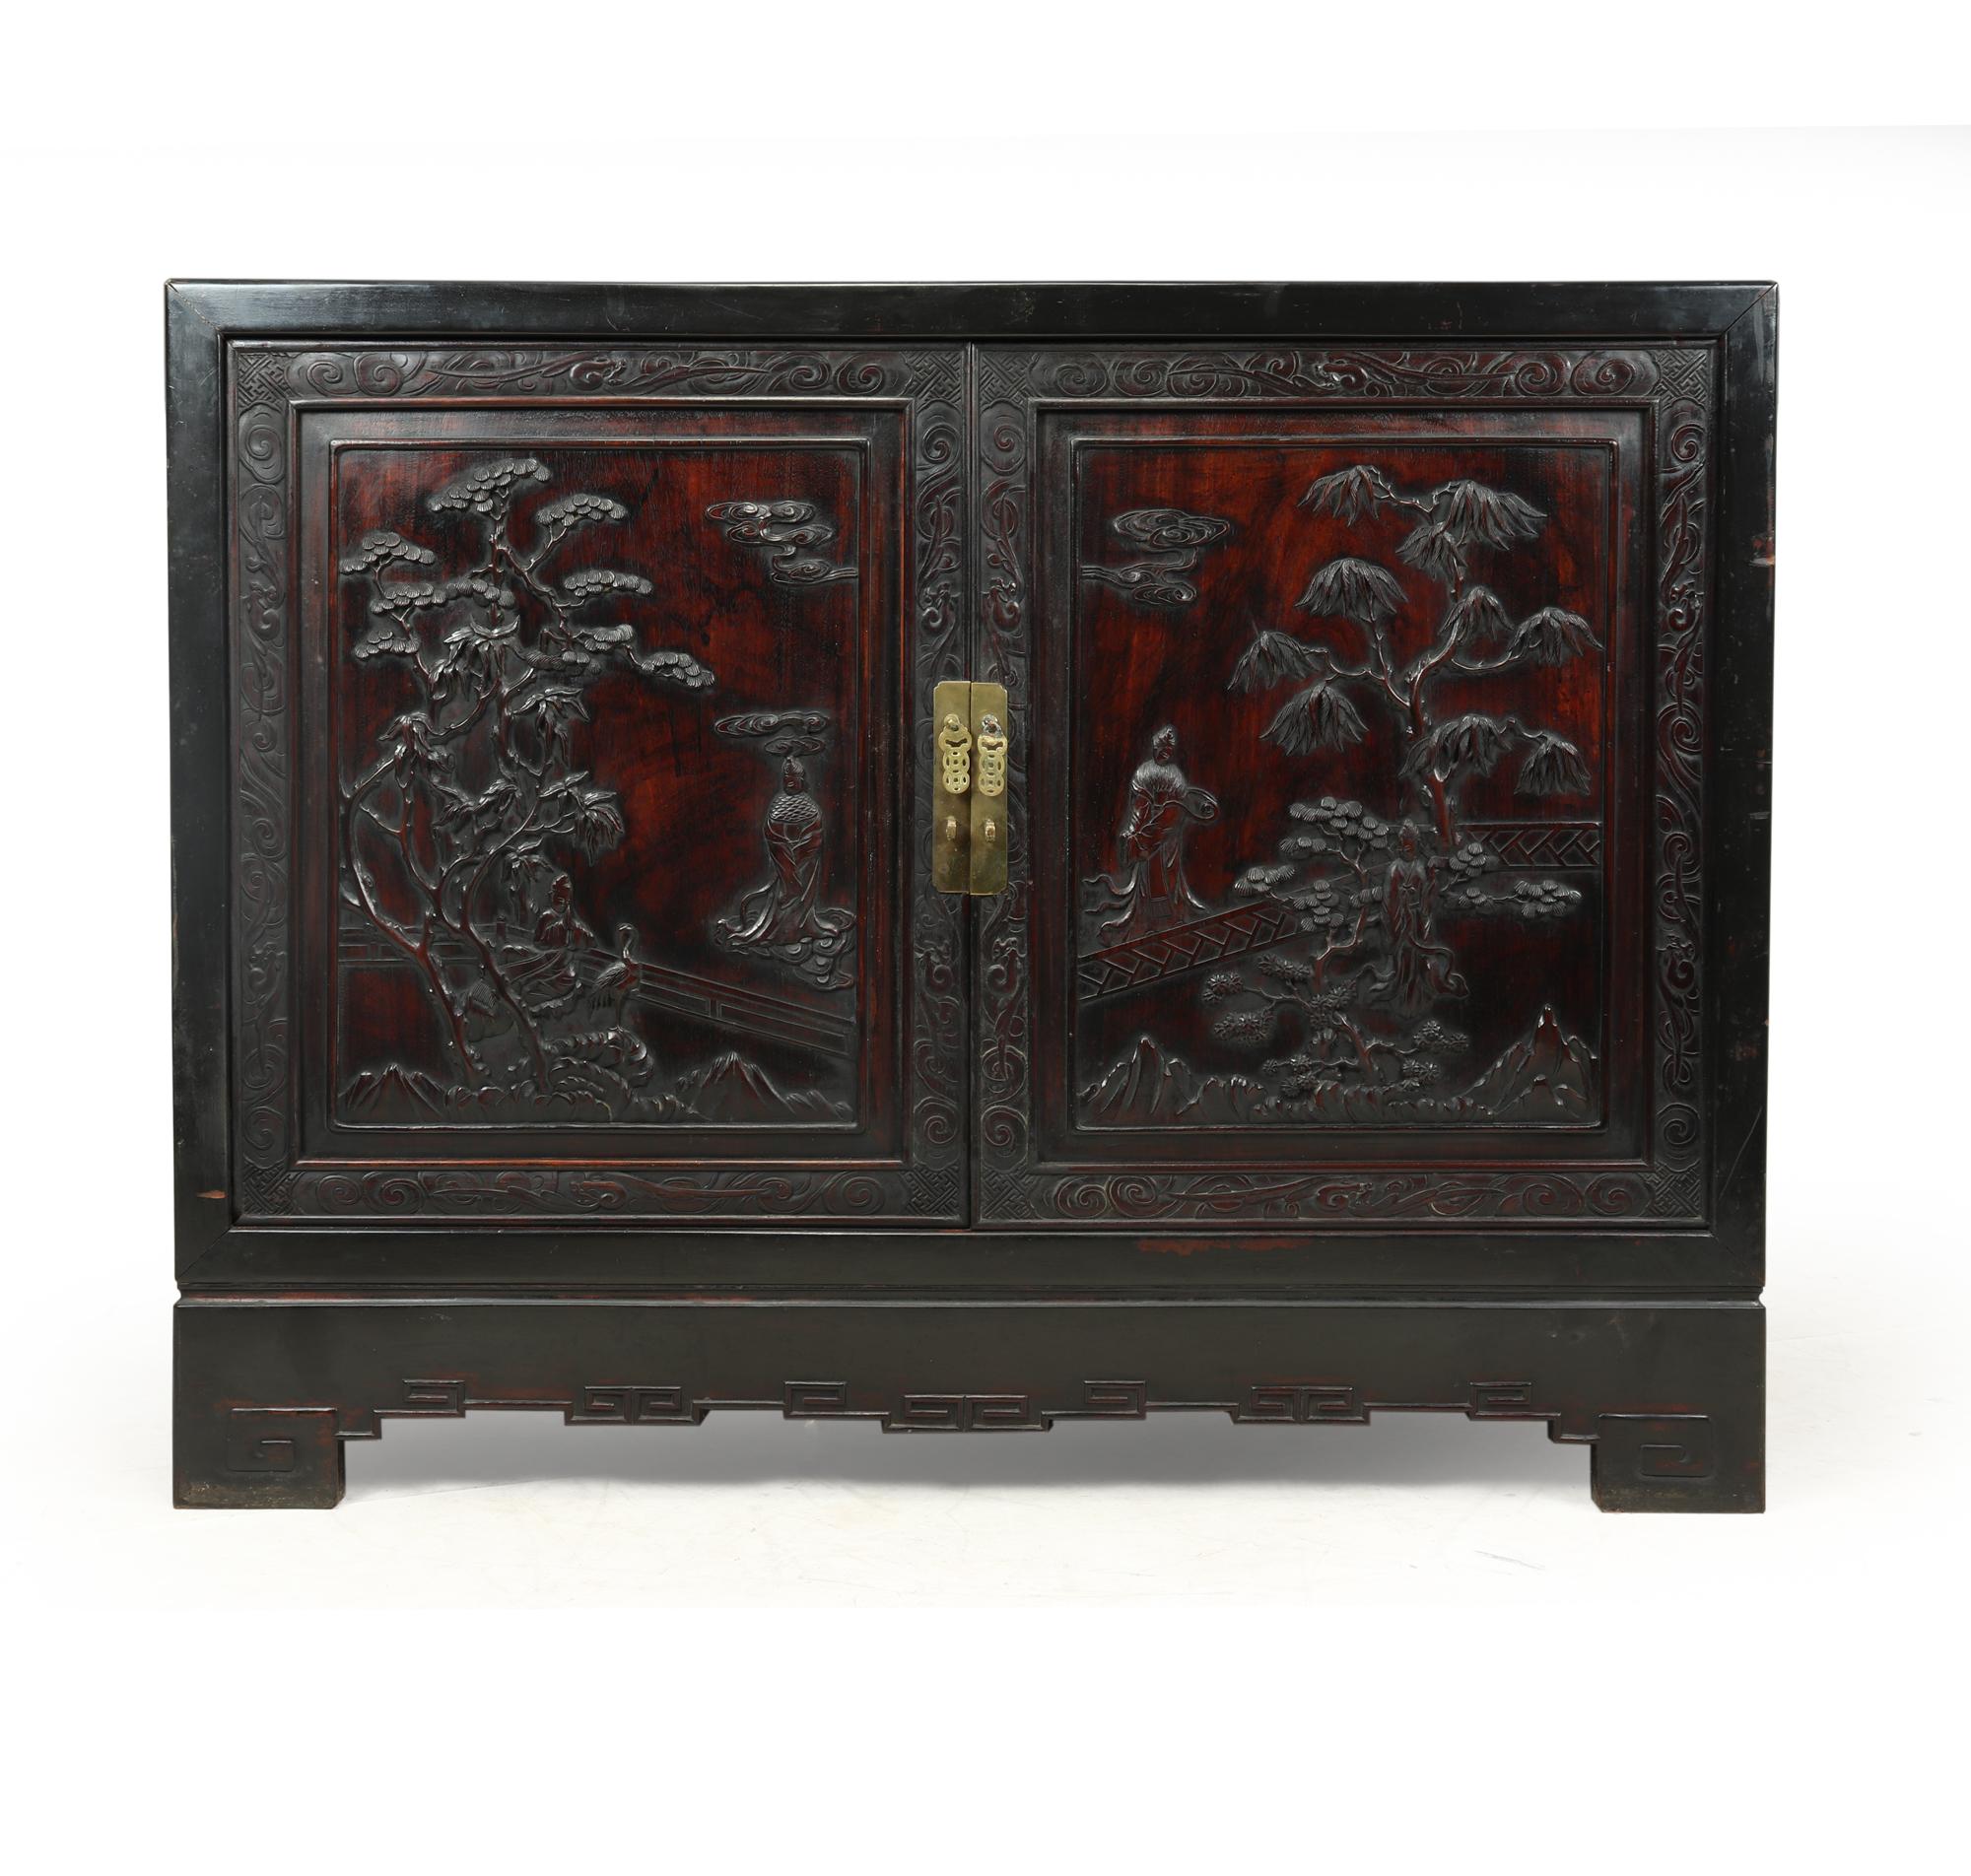 A two door sideboard fitted with drawers inside produced in China in the 1920’ from Zitan and crisply carved and then black lacquered, I am unsure of the timber but the cabinet is very heavy almost like it is padouk, the carved panels are excelent